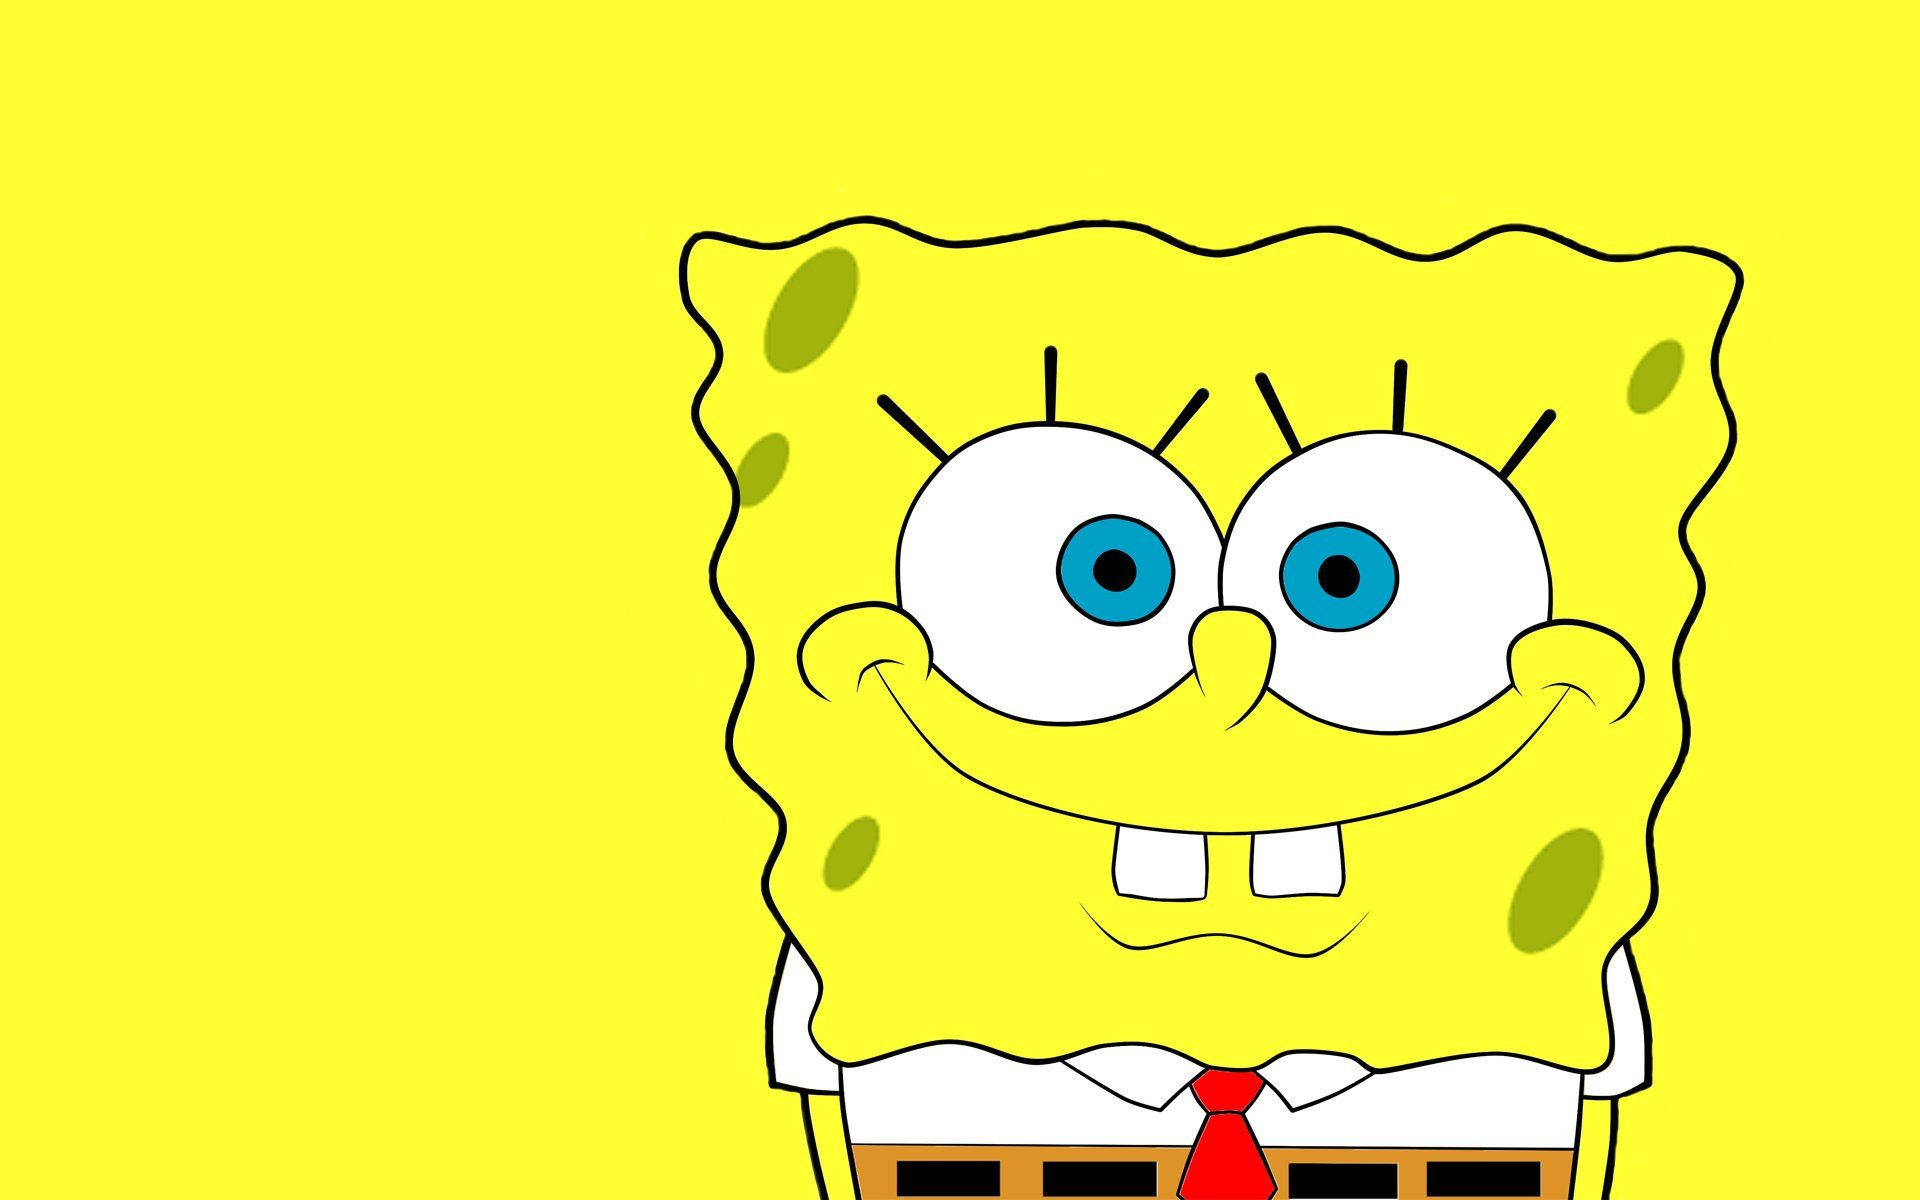 "What are you waiting for? Live life and enjoy being yellow with Spongebob Squarepants!" Wallpaper